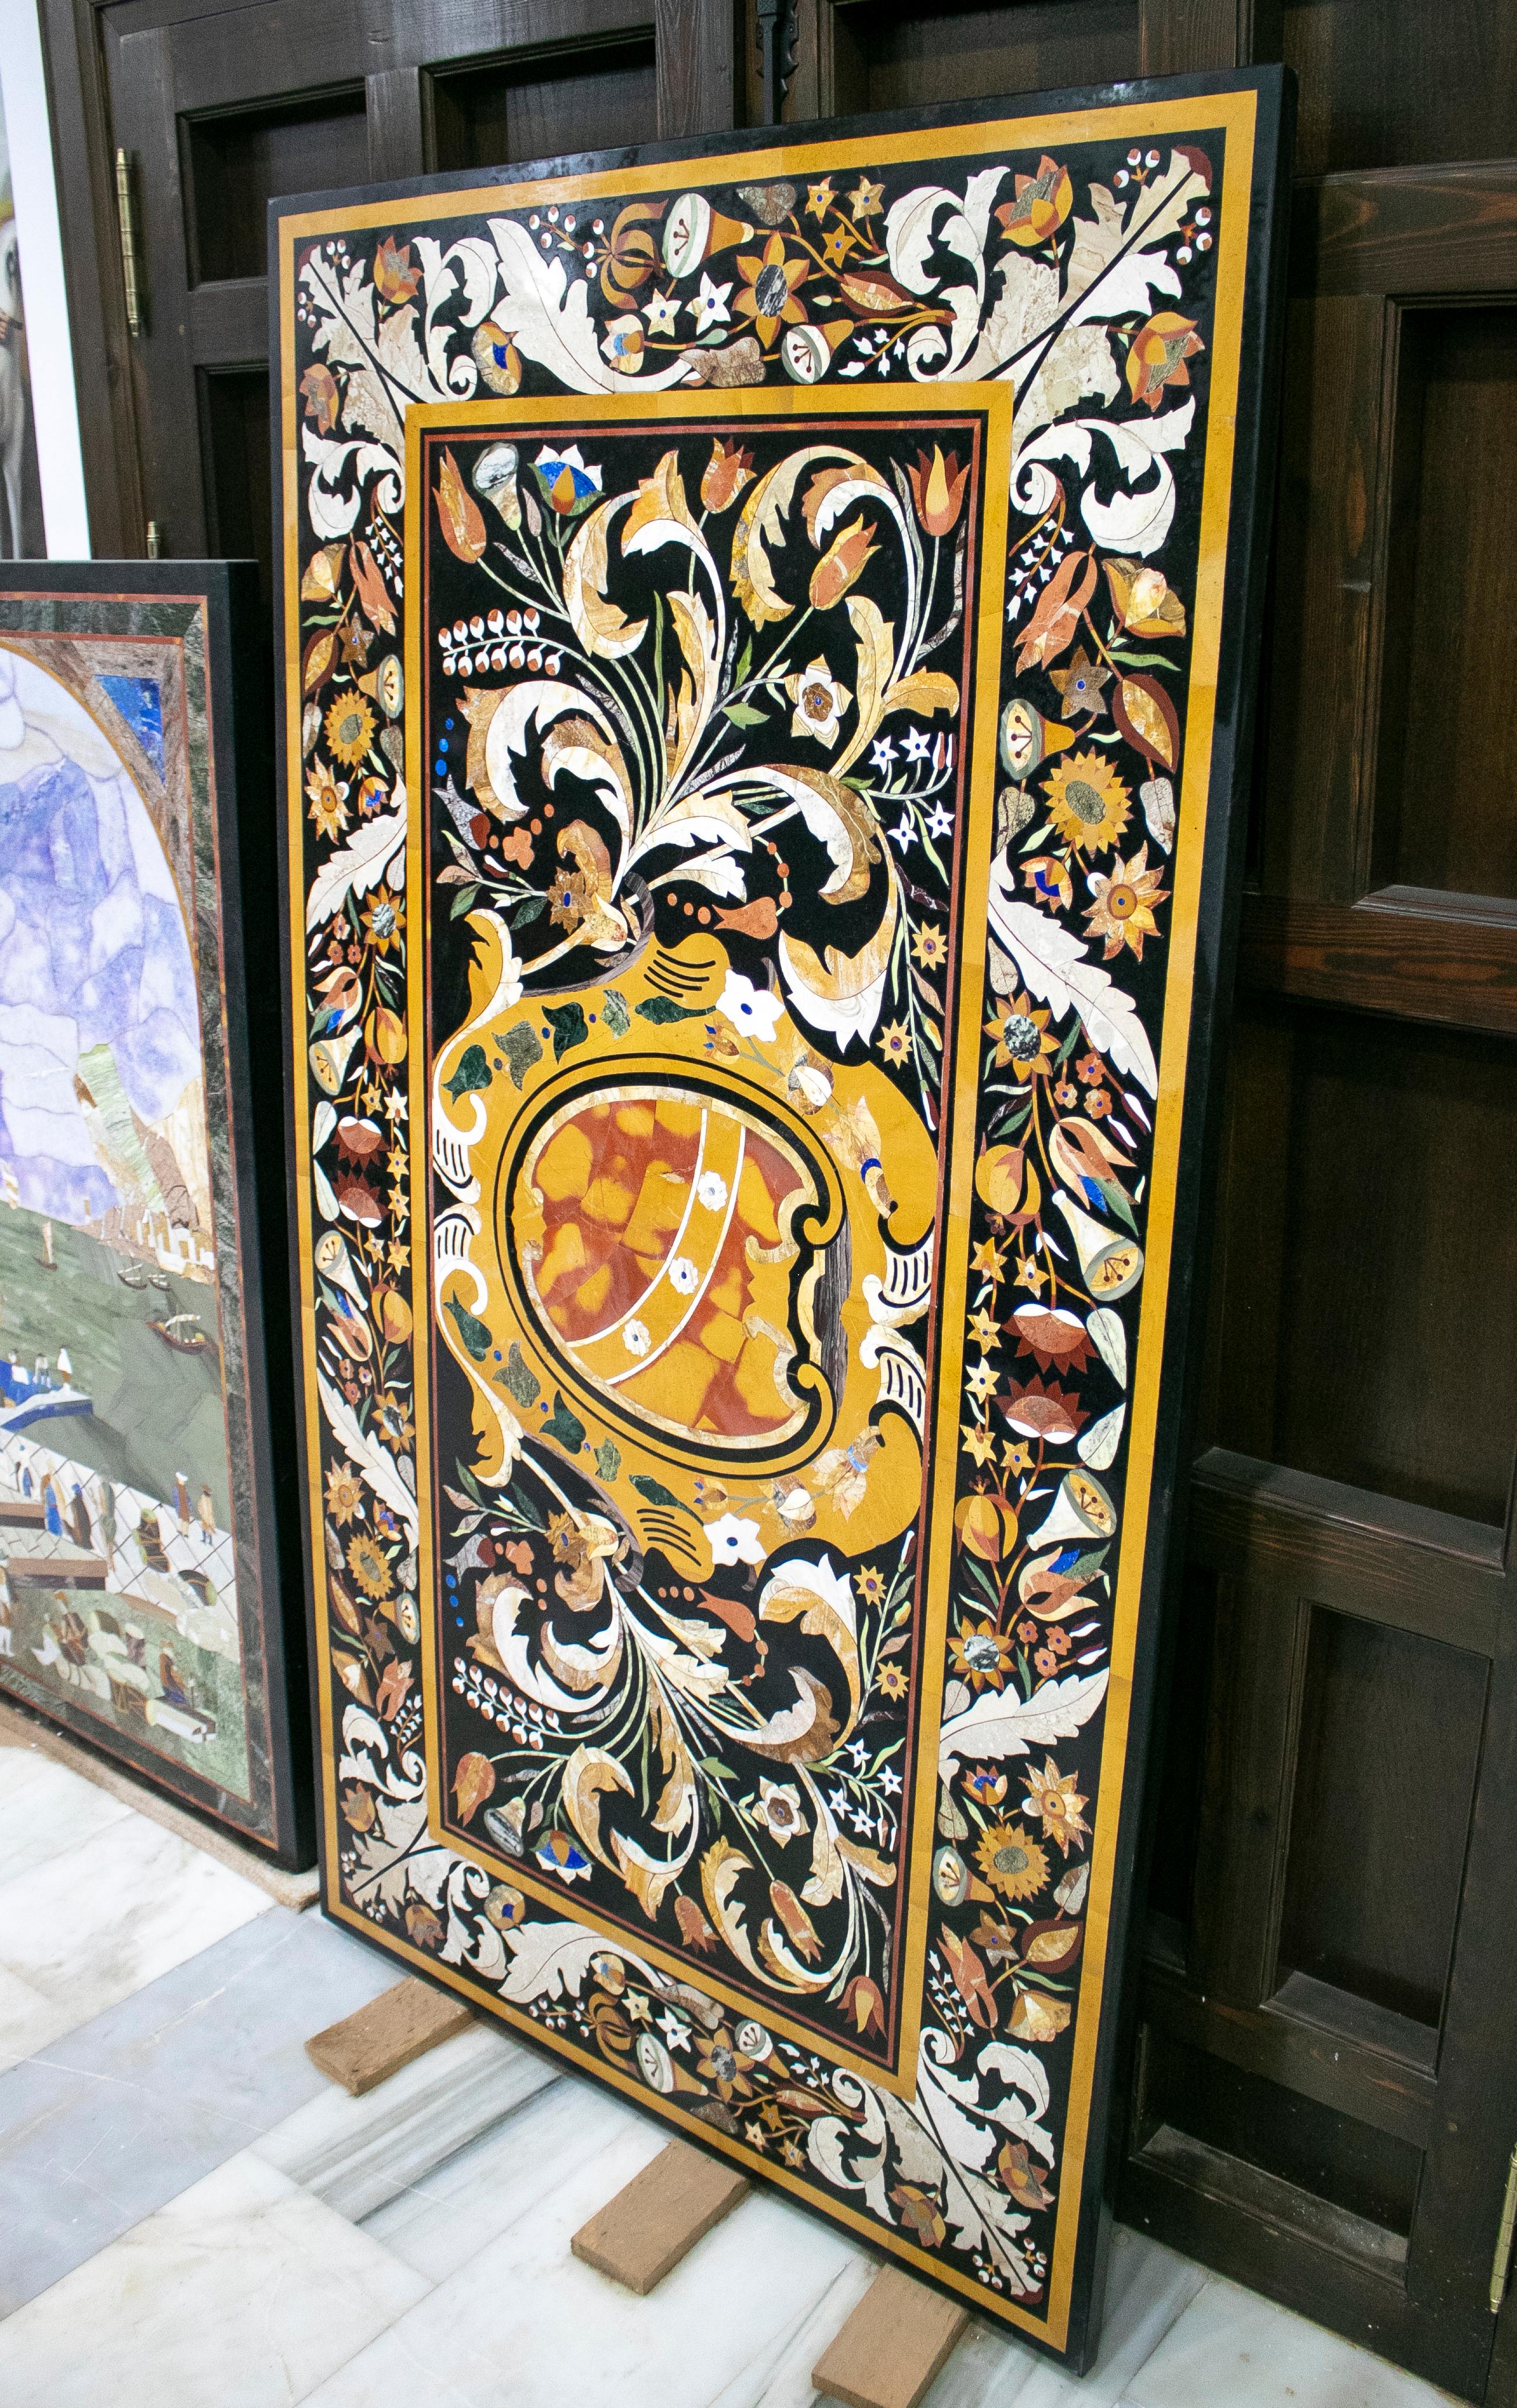 Rectangular Italian Florentine Pietra Dura Stone black marble table top with a framed coat of arms mosaic inlay hand crafted using blue lapis lazuli and an assortment of semiprecious stones and marbles, predominantly ochre.